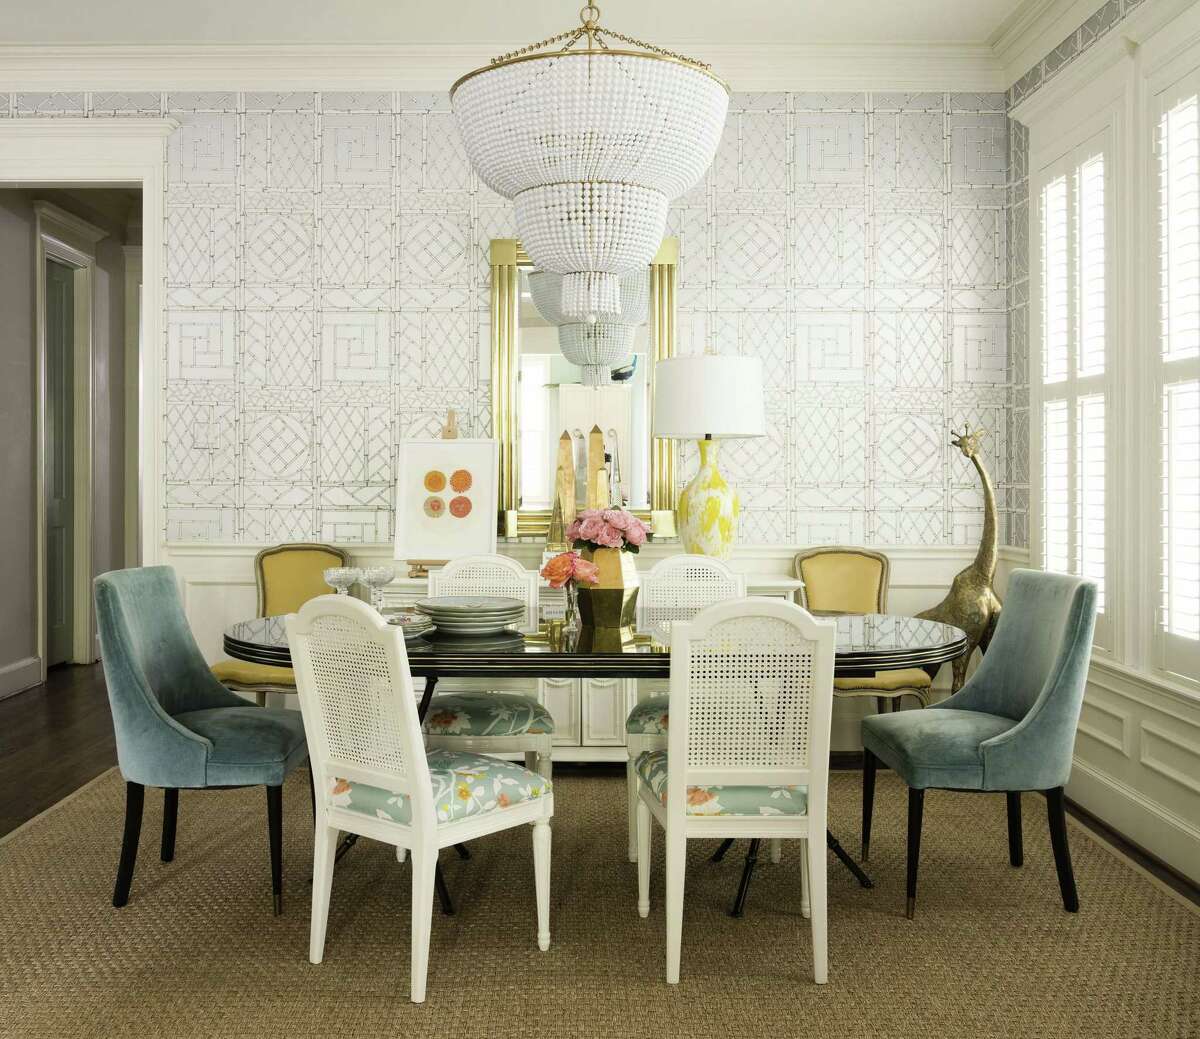 With blue and yellow upholstery carrying the color scheme of the rest of the house, the dining chairs don’t appear mismatched. The "Jacqueline" two-tier chandelier is from Circa Lighting.